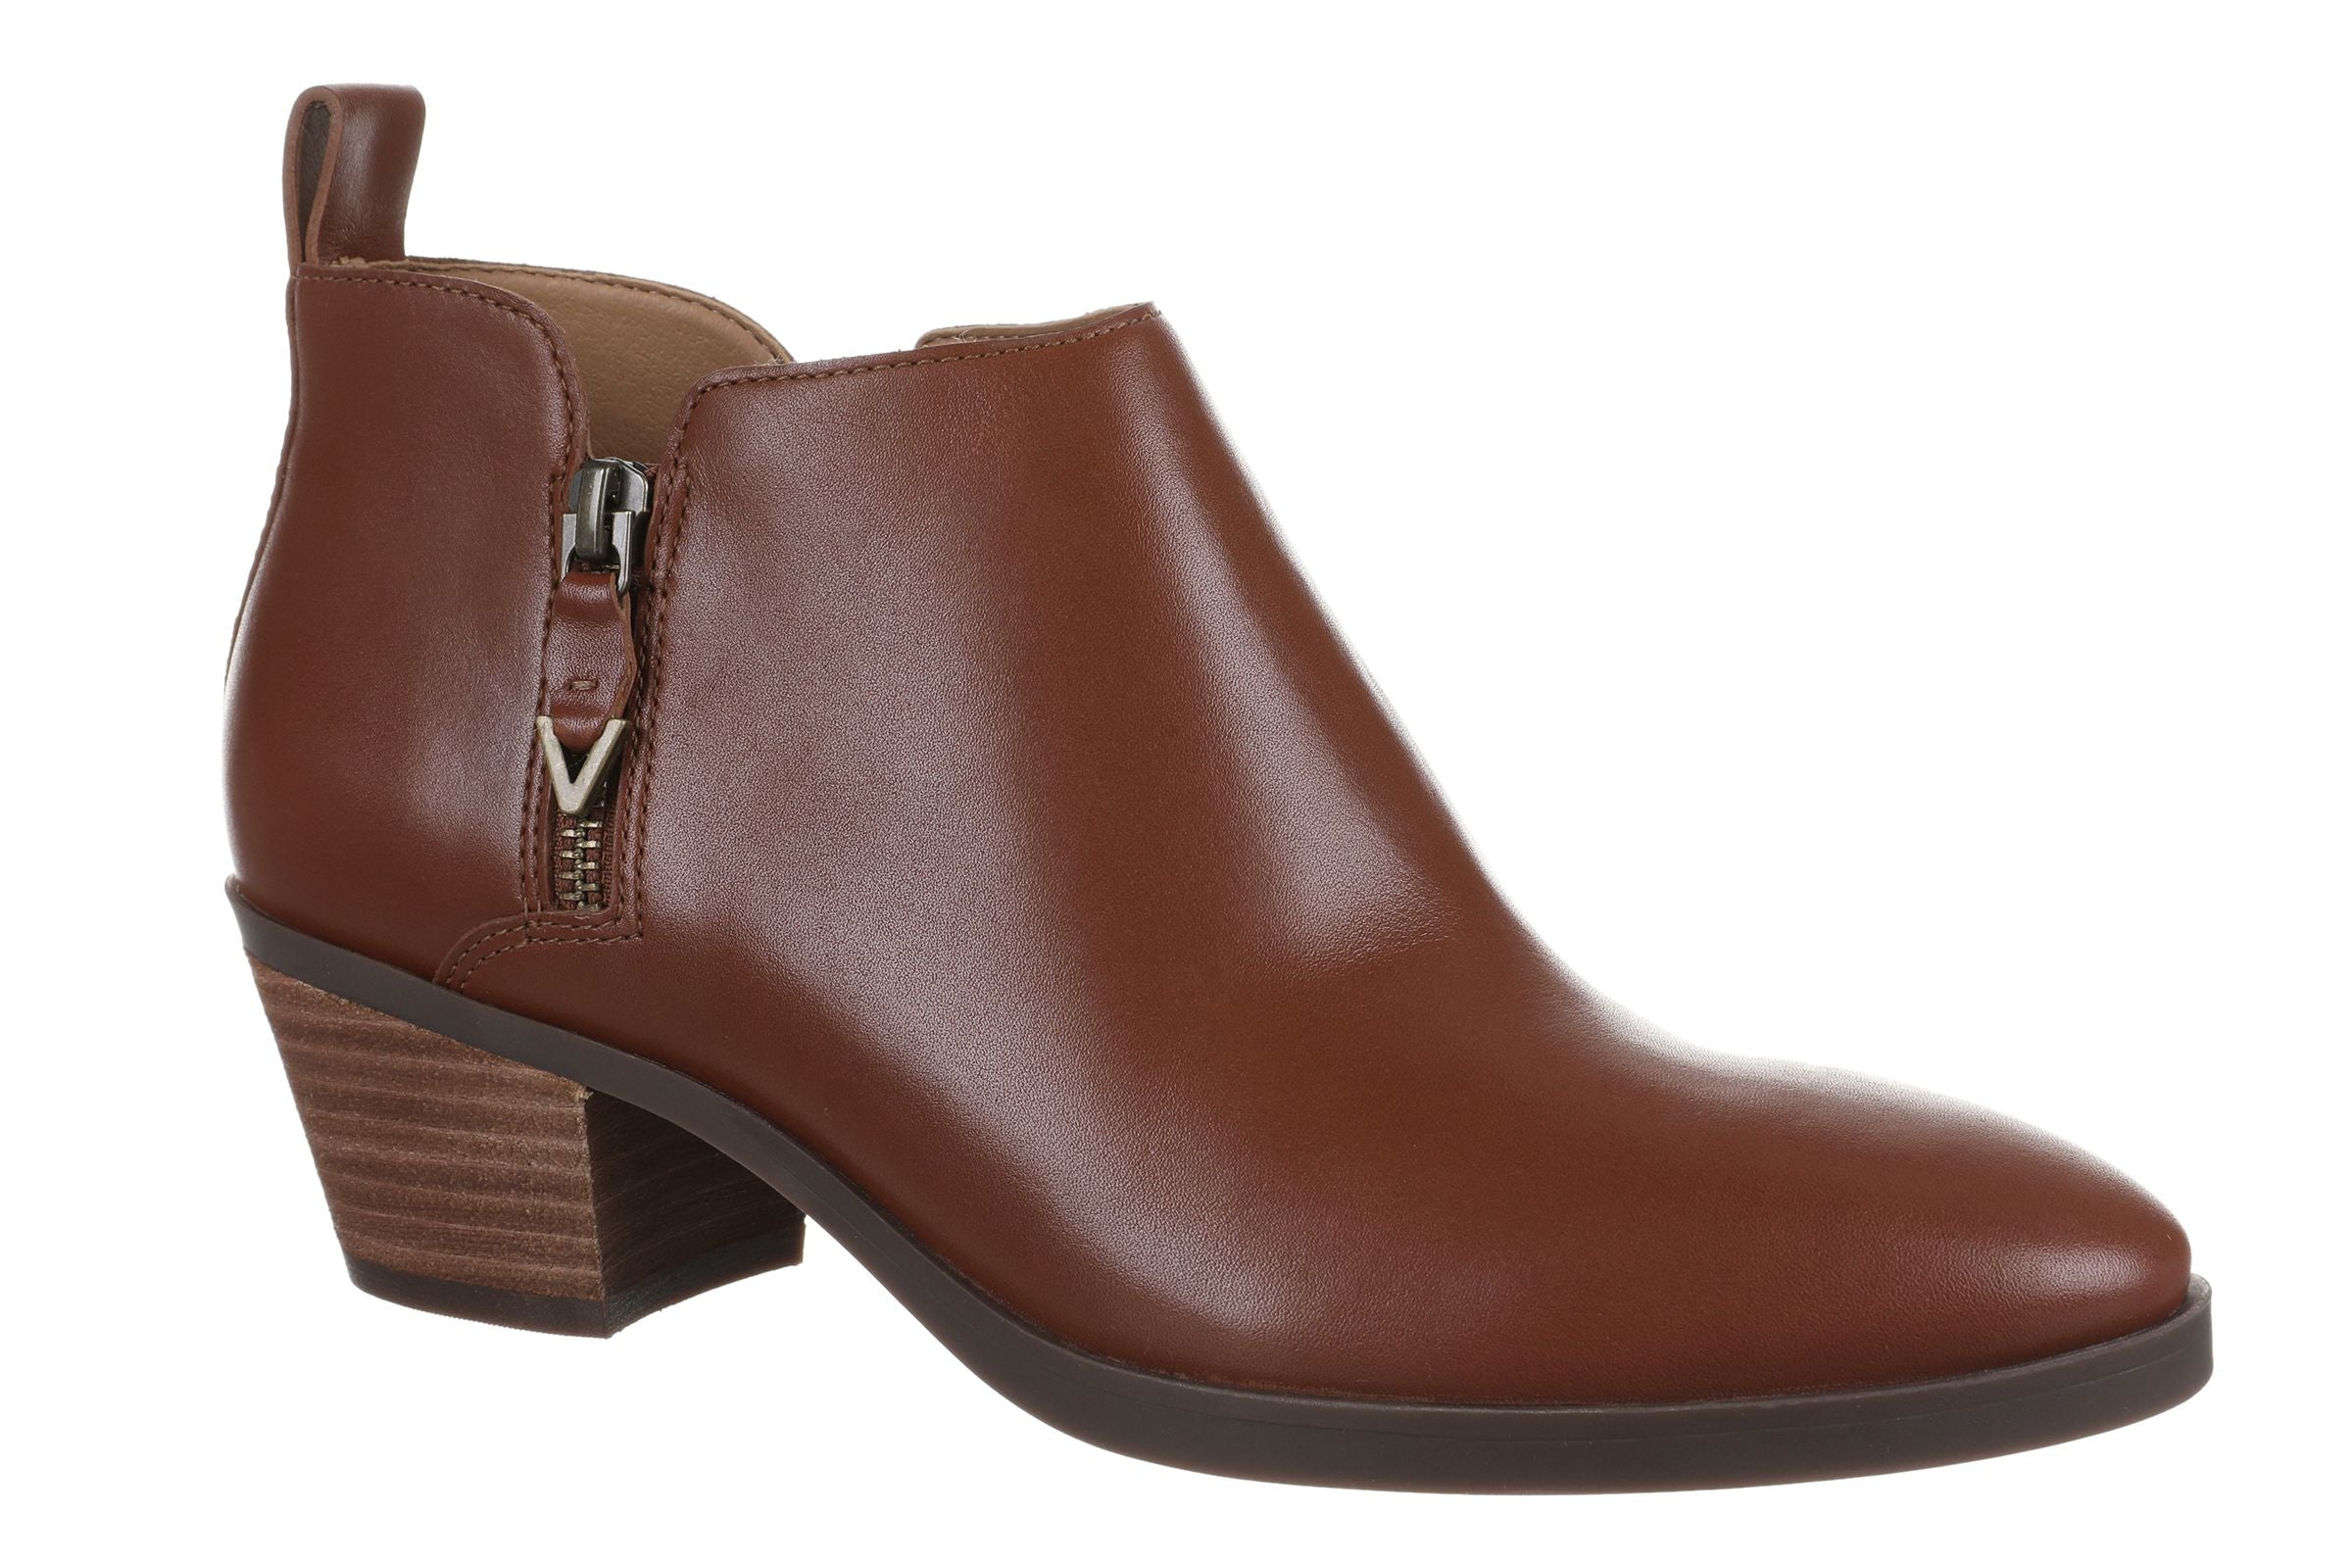 Women's Vionic Cecily Ankle Boot